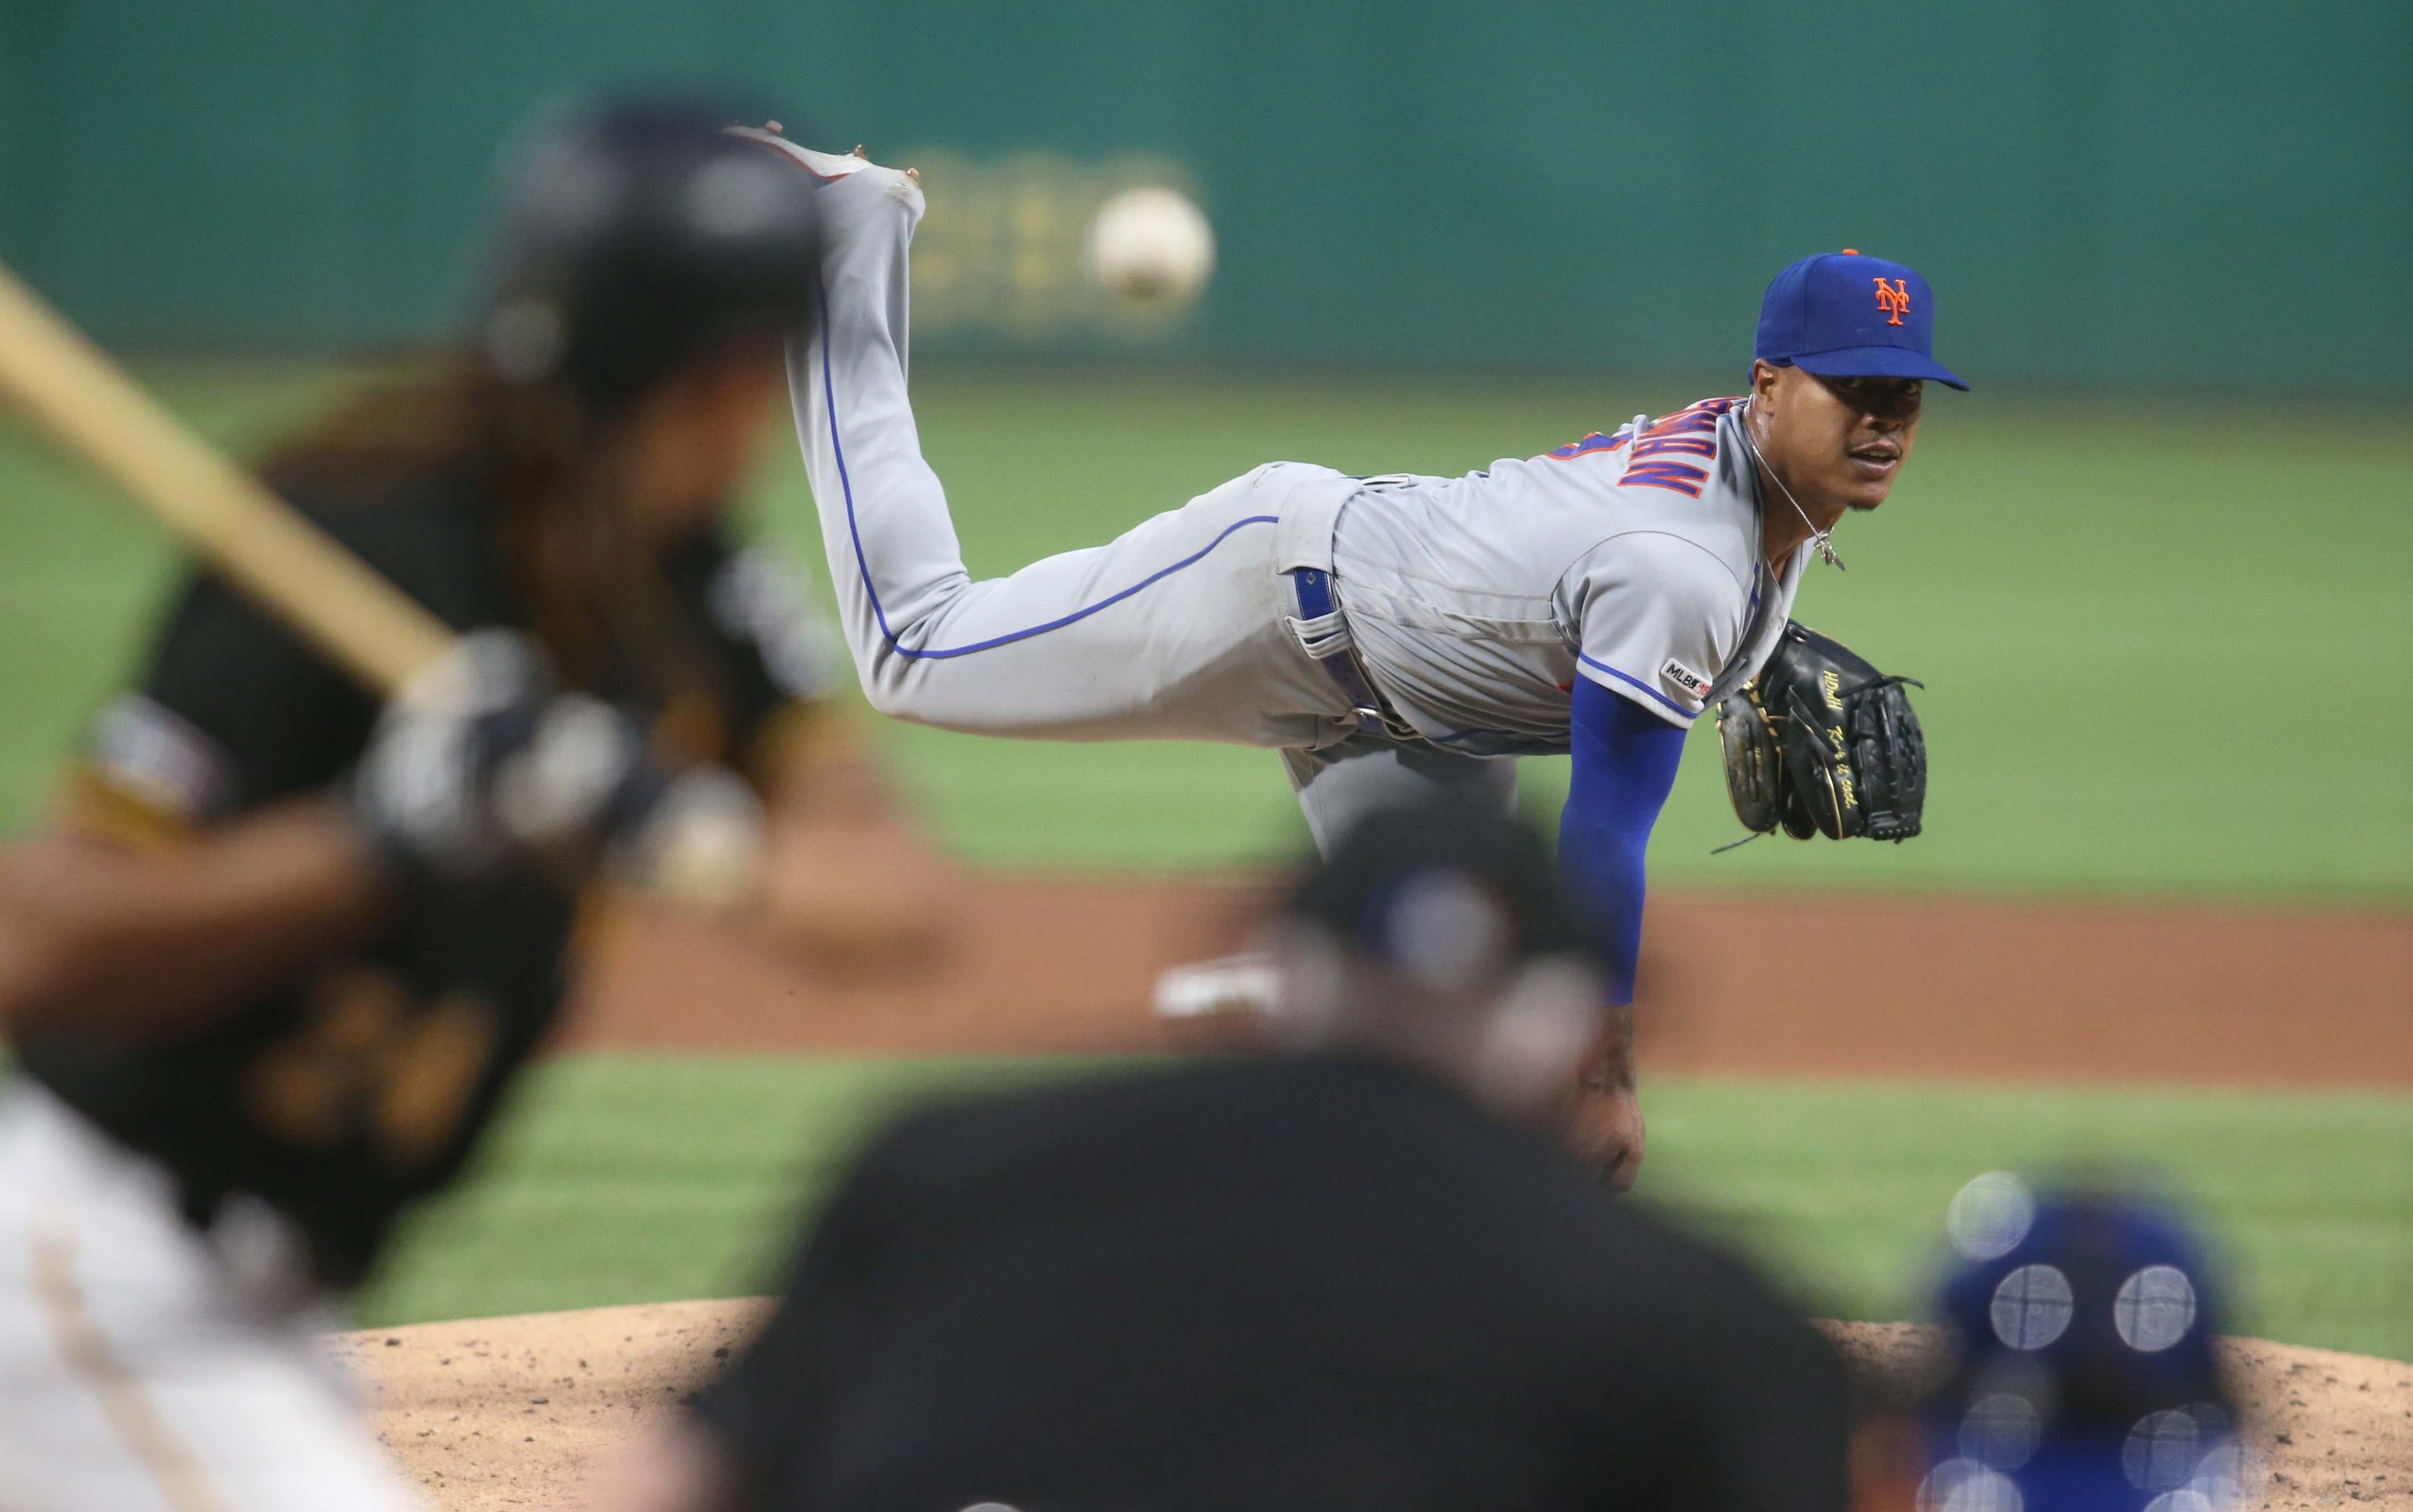 Mets: Marcus Stroman's debut and what he needs to do the next time out